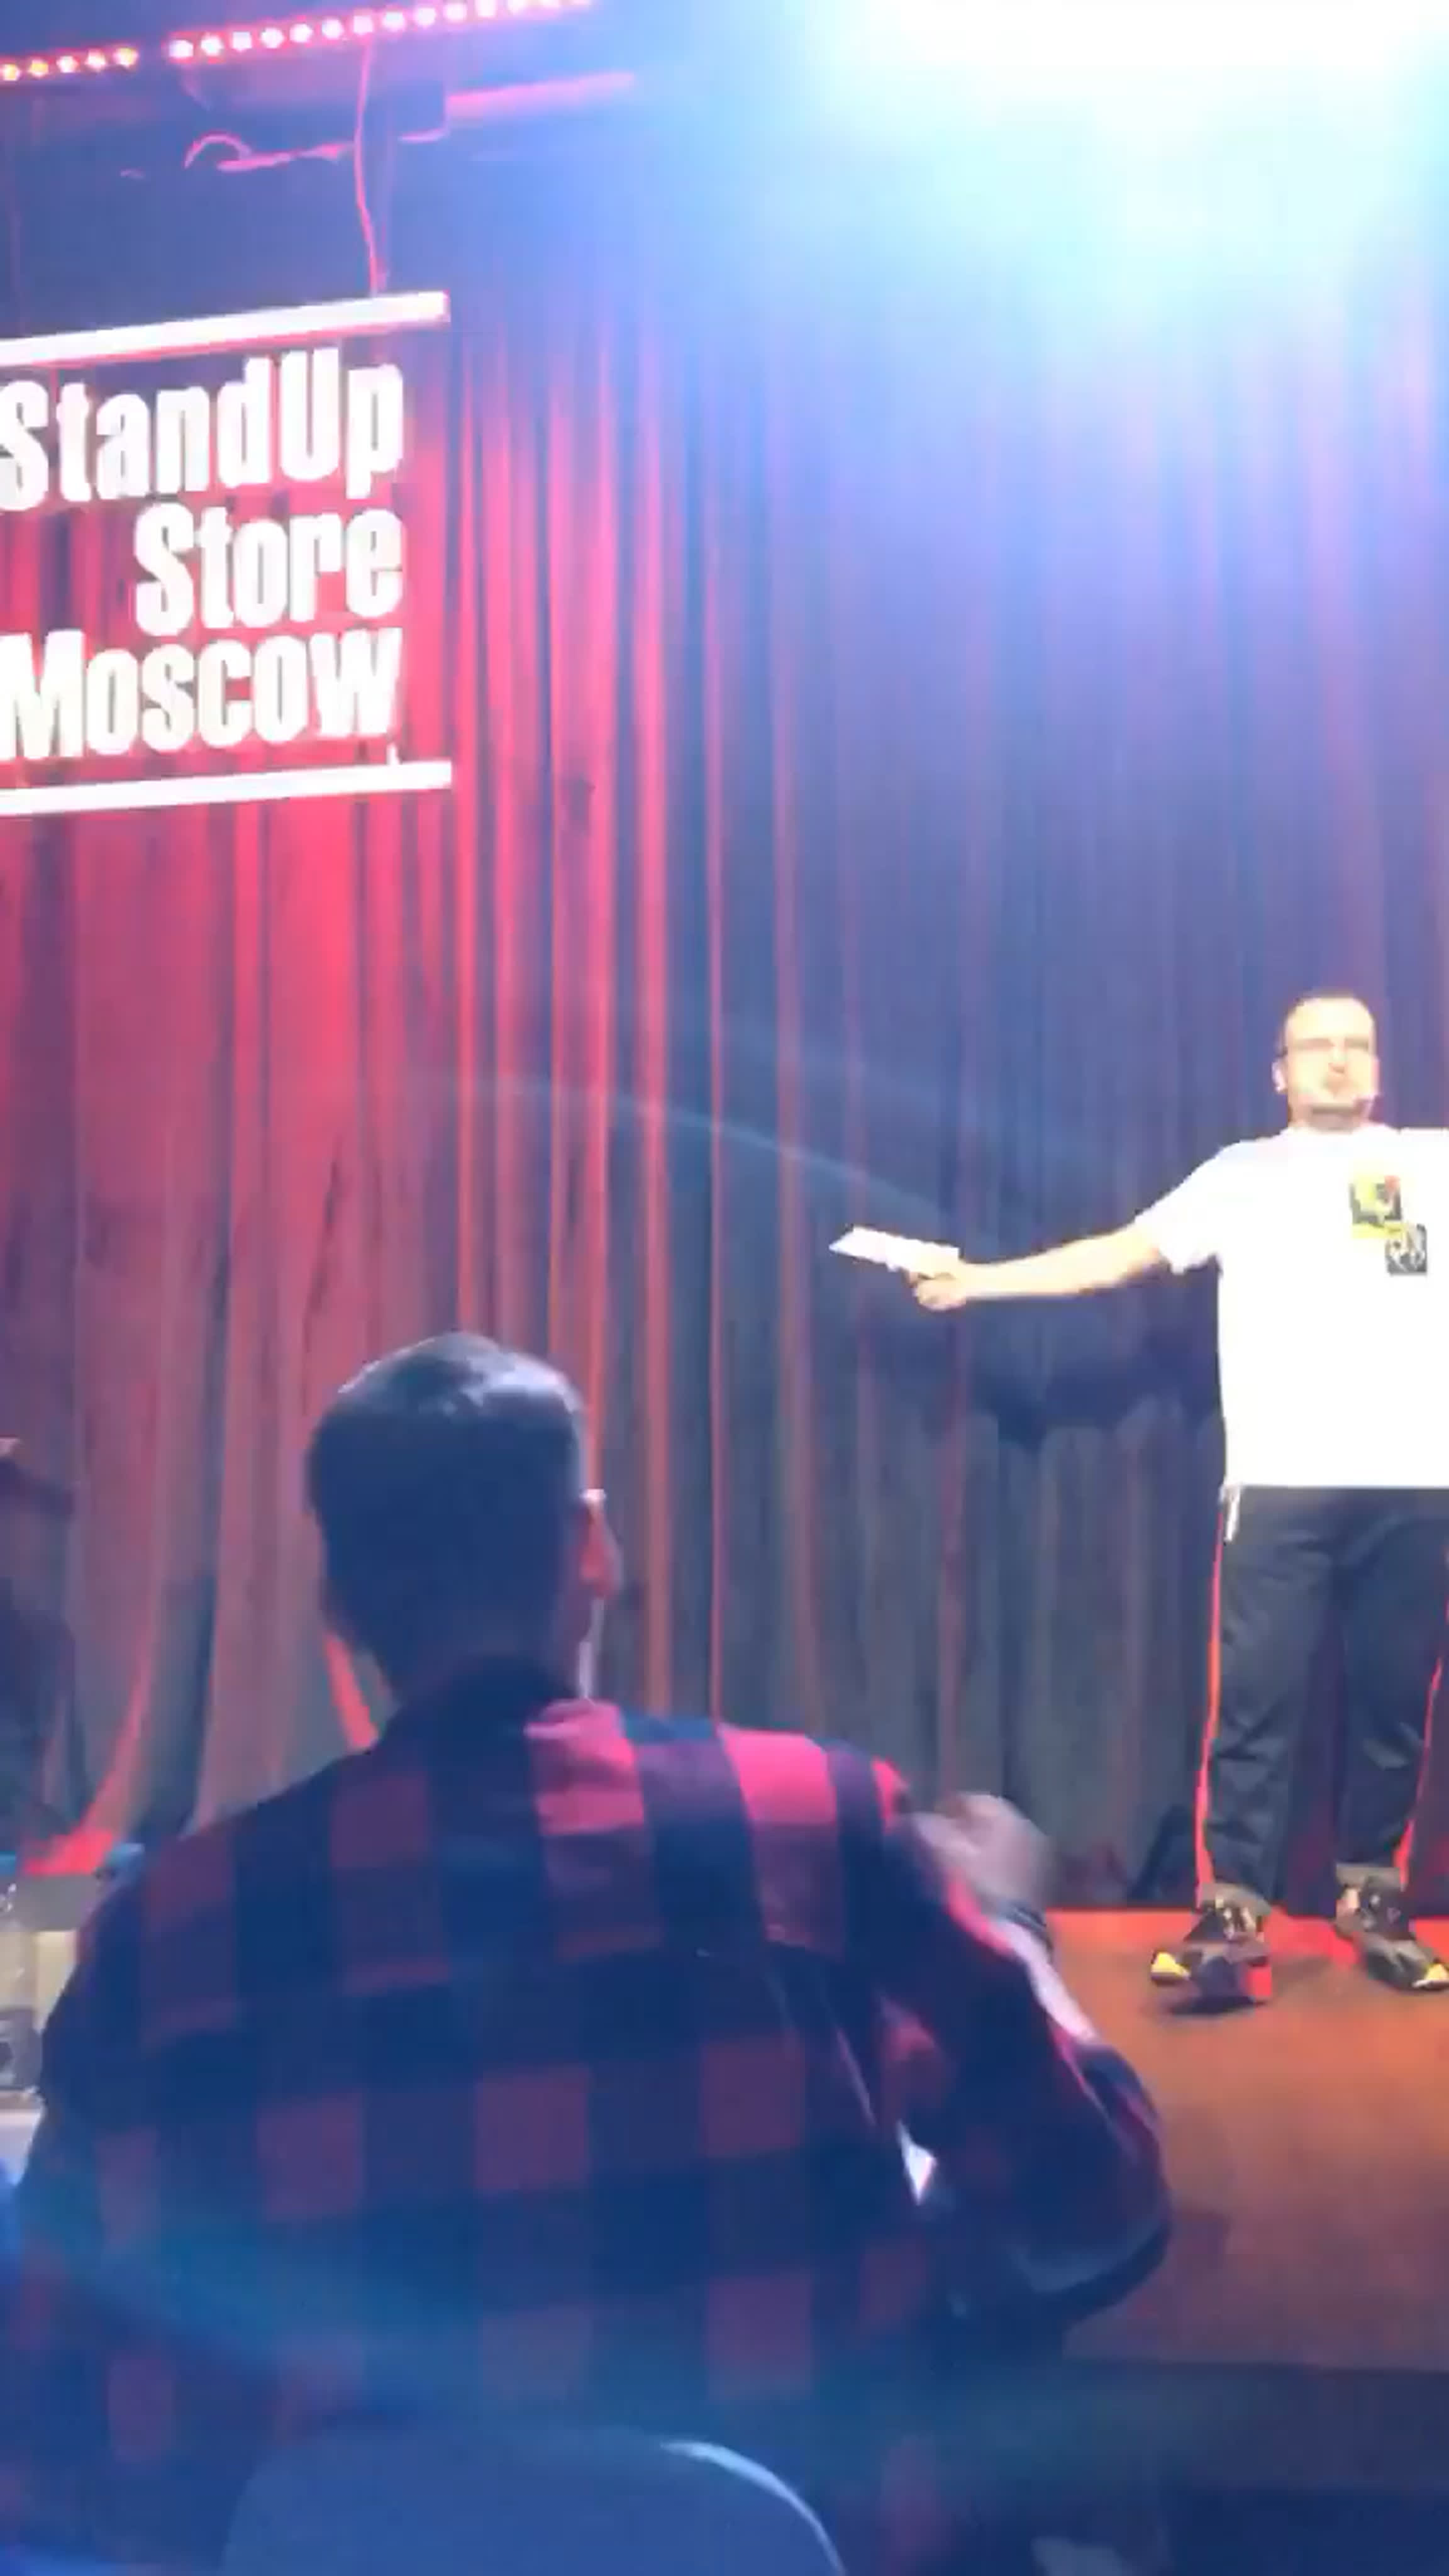 10.03.20 - StandUp Store Moscow